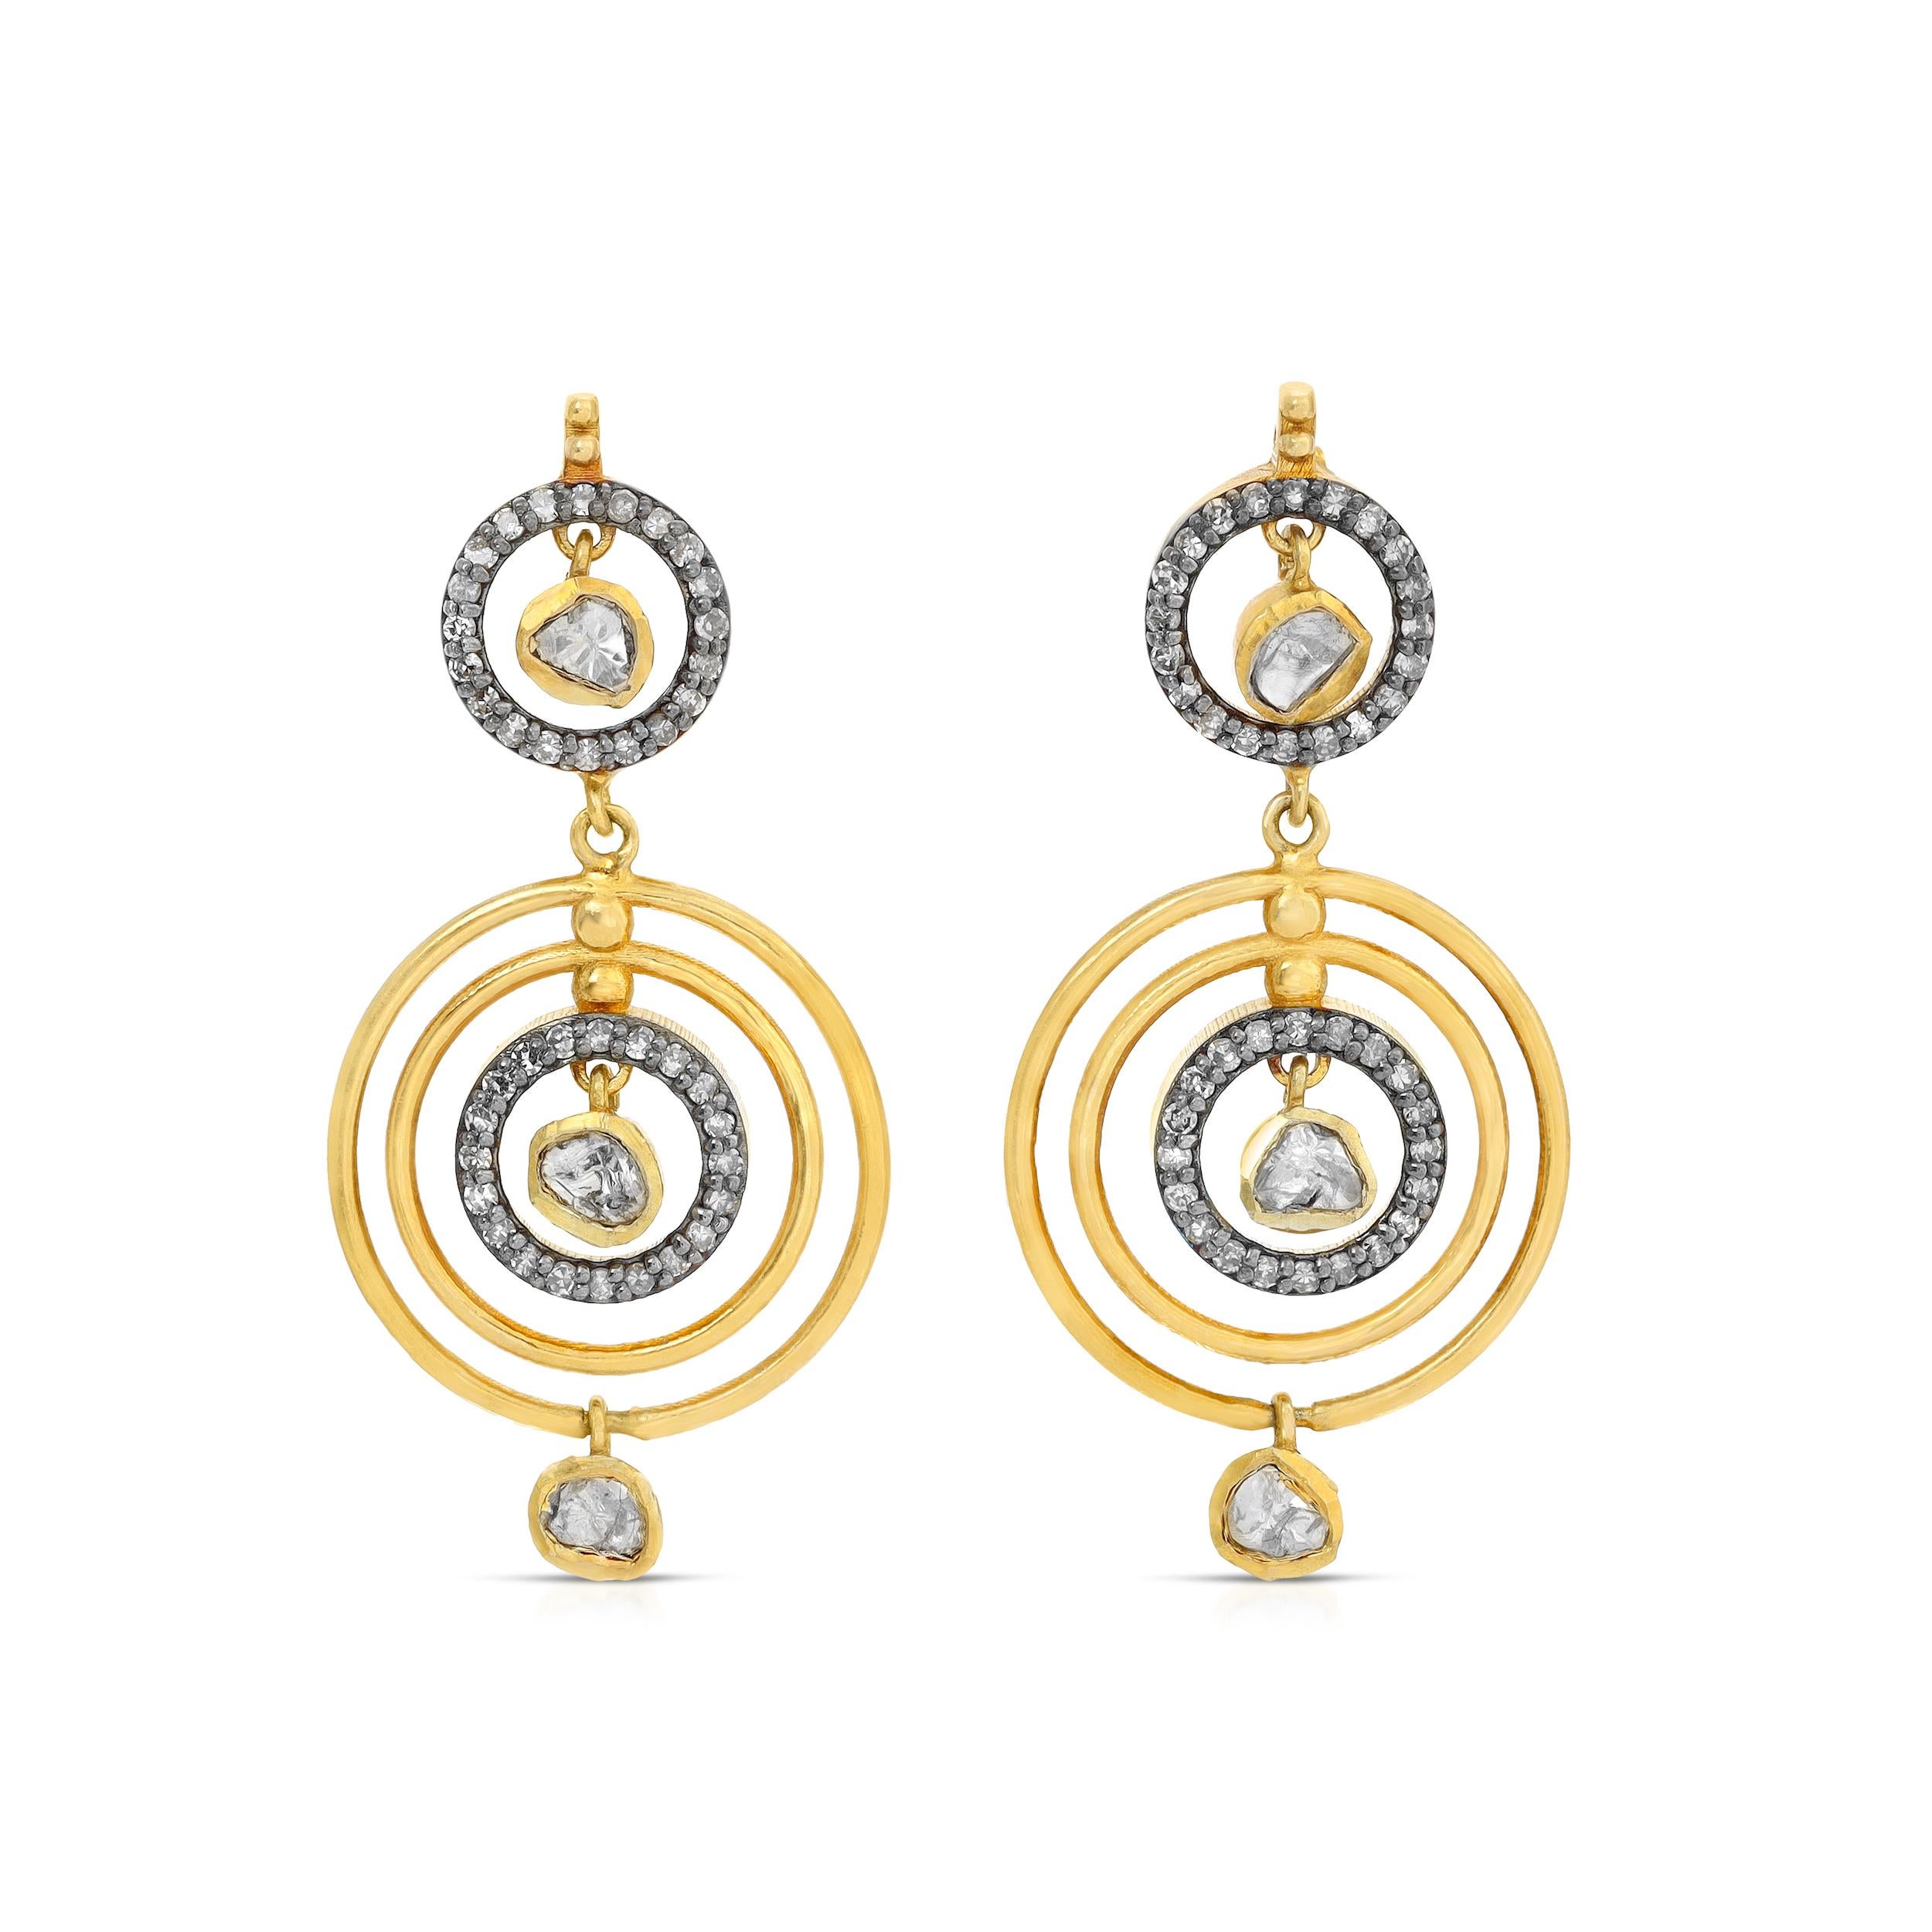 Fabulous diamond chandelier earrings of 18 Karat Gold overlay Silver in a contemporary Nouveau Jaipur design. These chandelier earrings feature fully set White Diamond top hoops with larger lower triple hoops suspending three twinkling center Polki